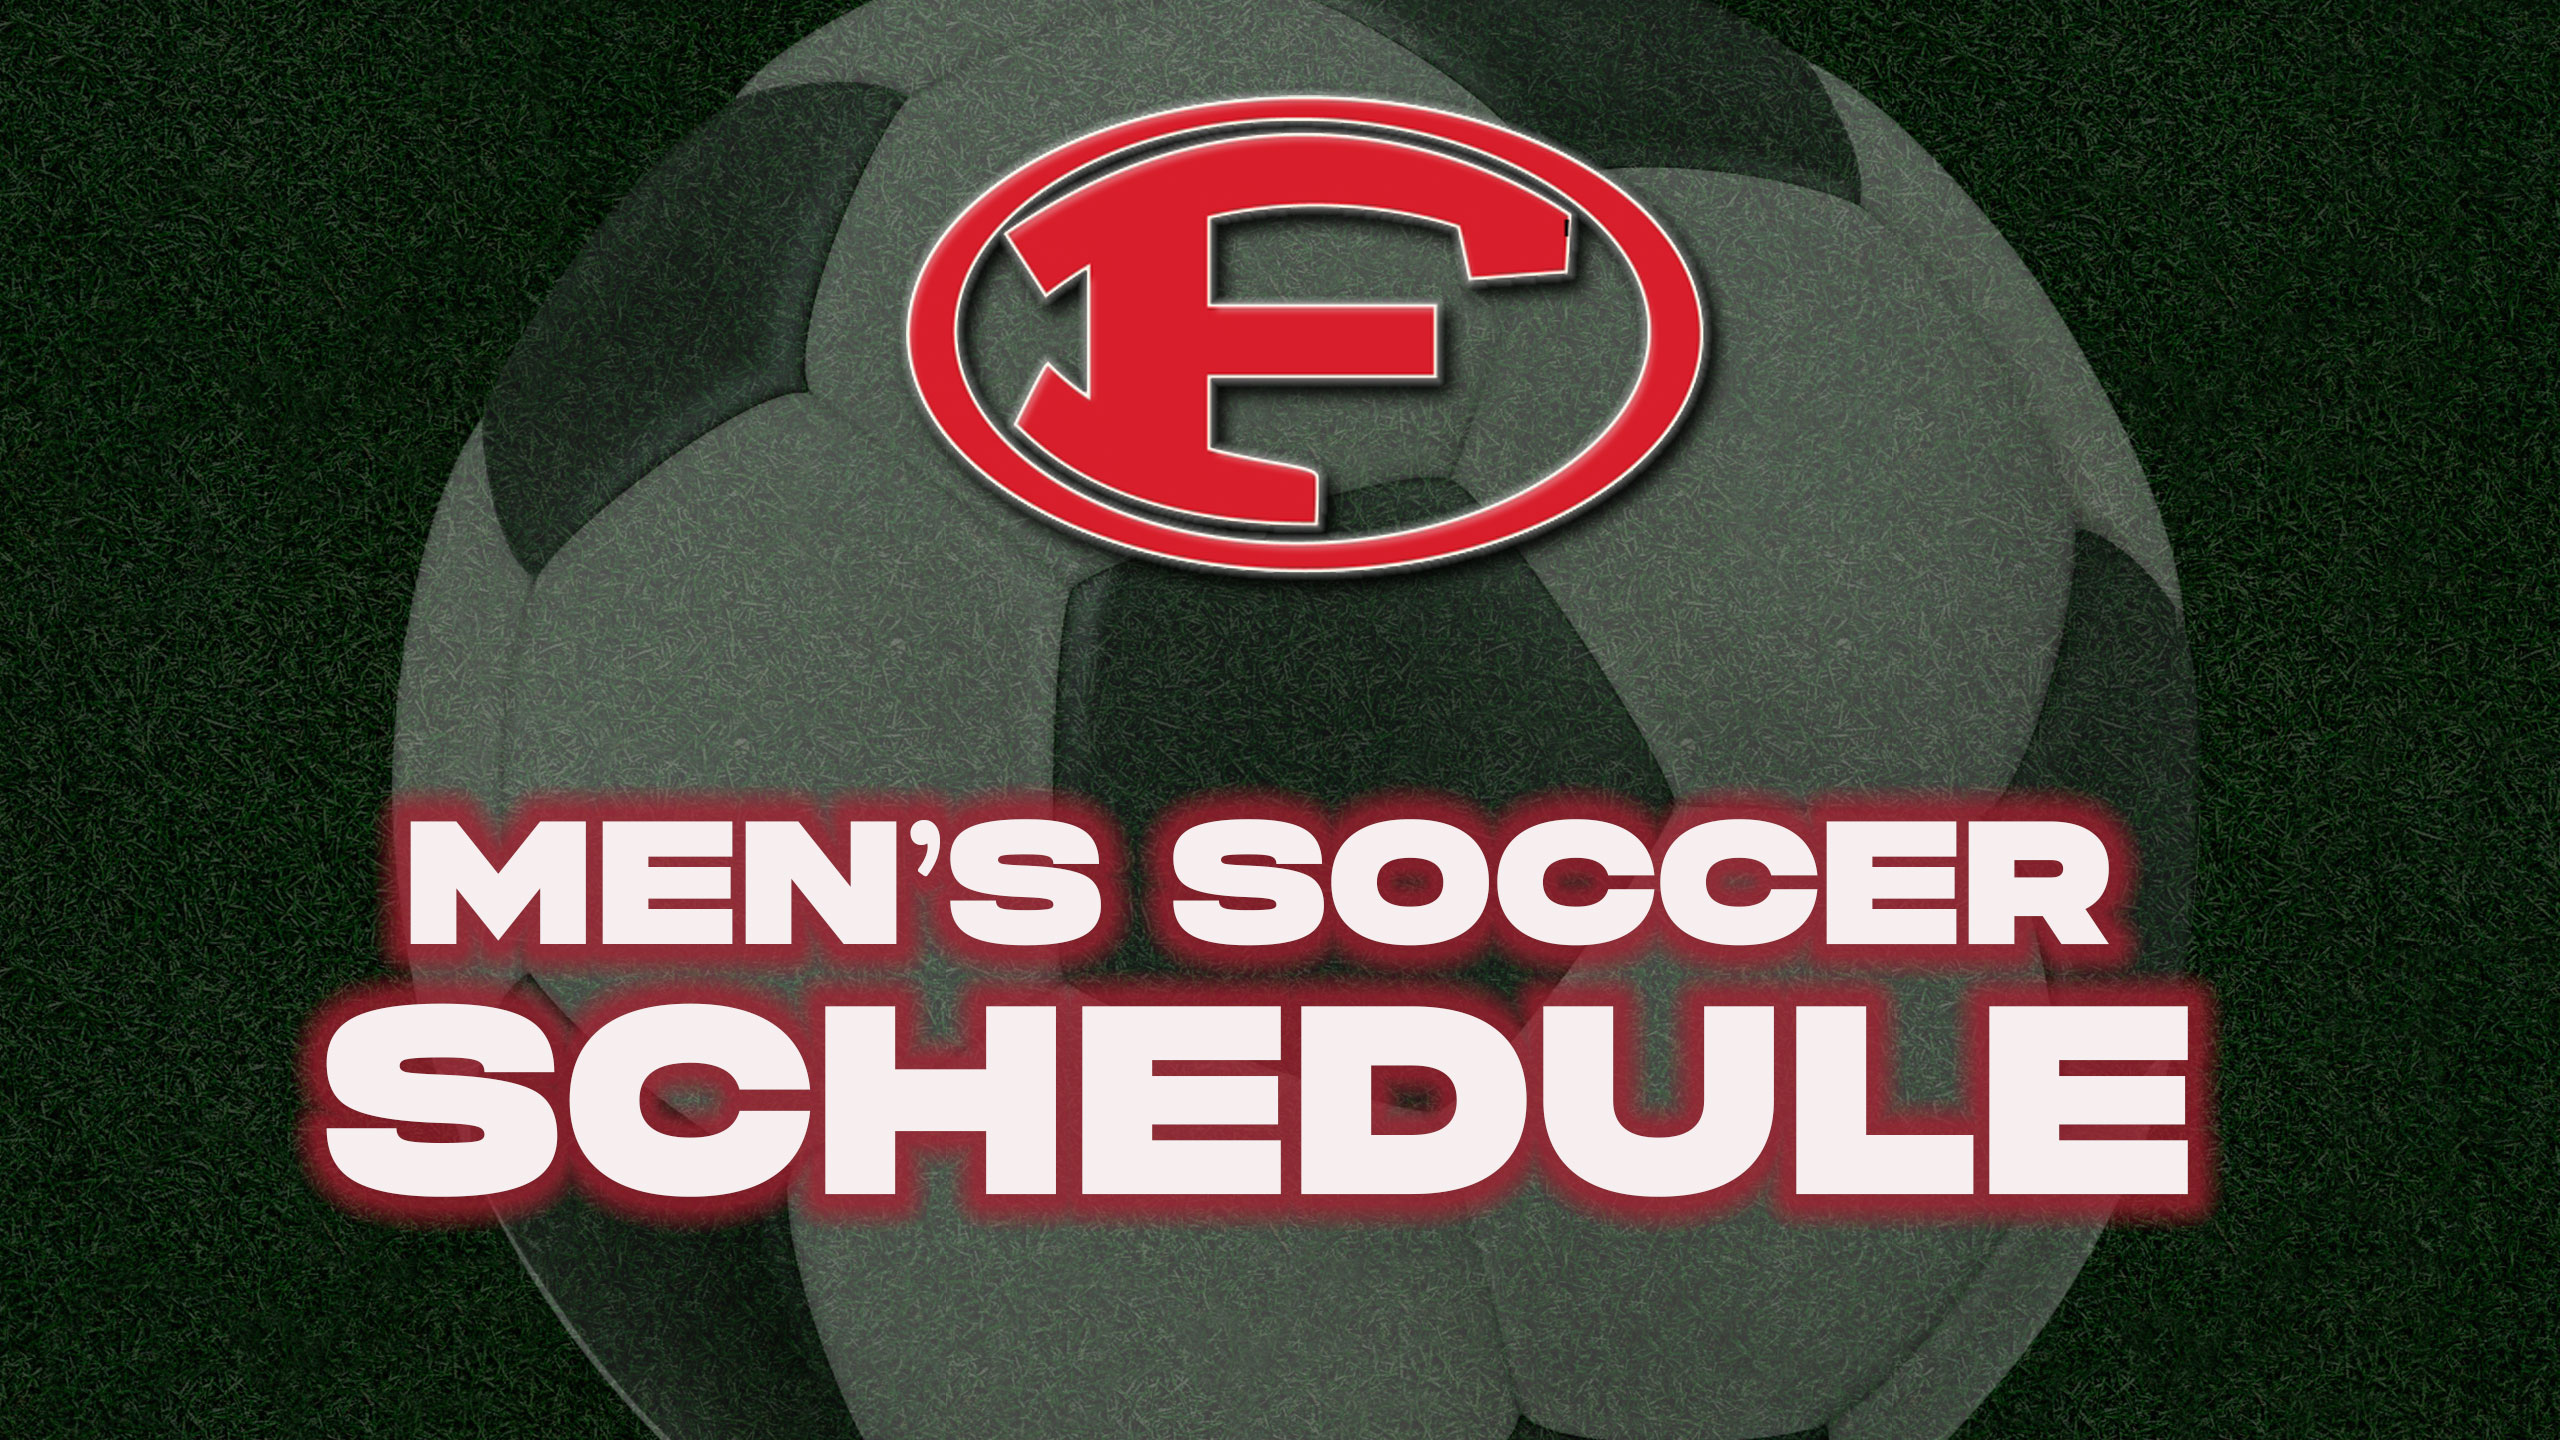 F in a circle in red. Men's Soccer Schedule text in white in front of a grayed out soccer ball.